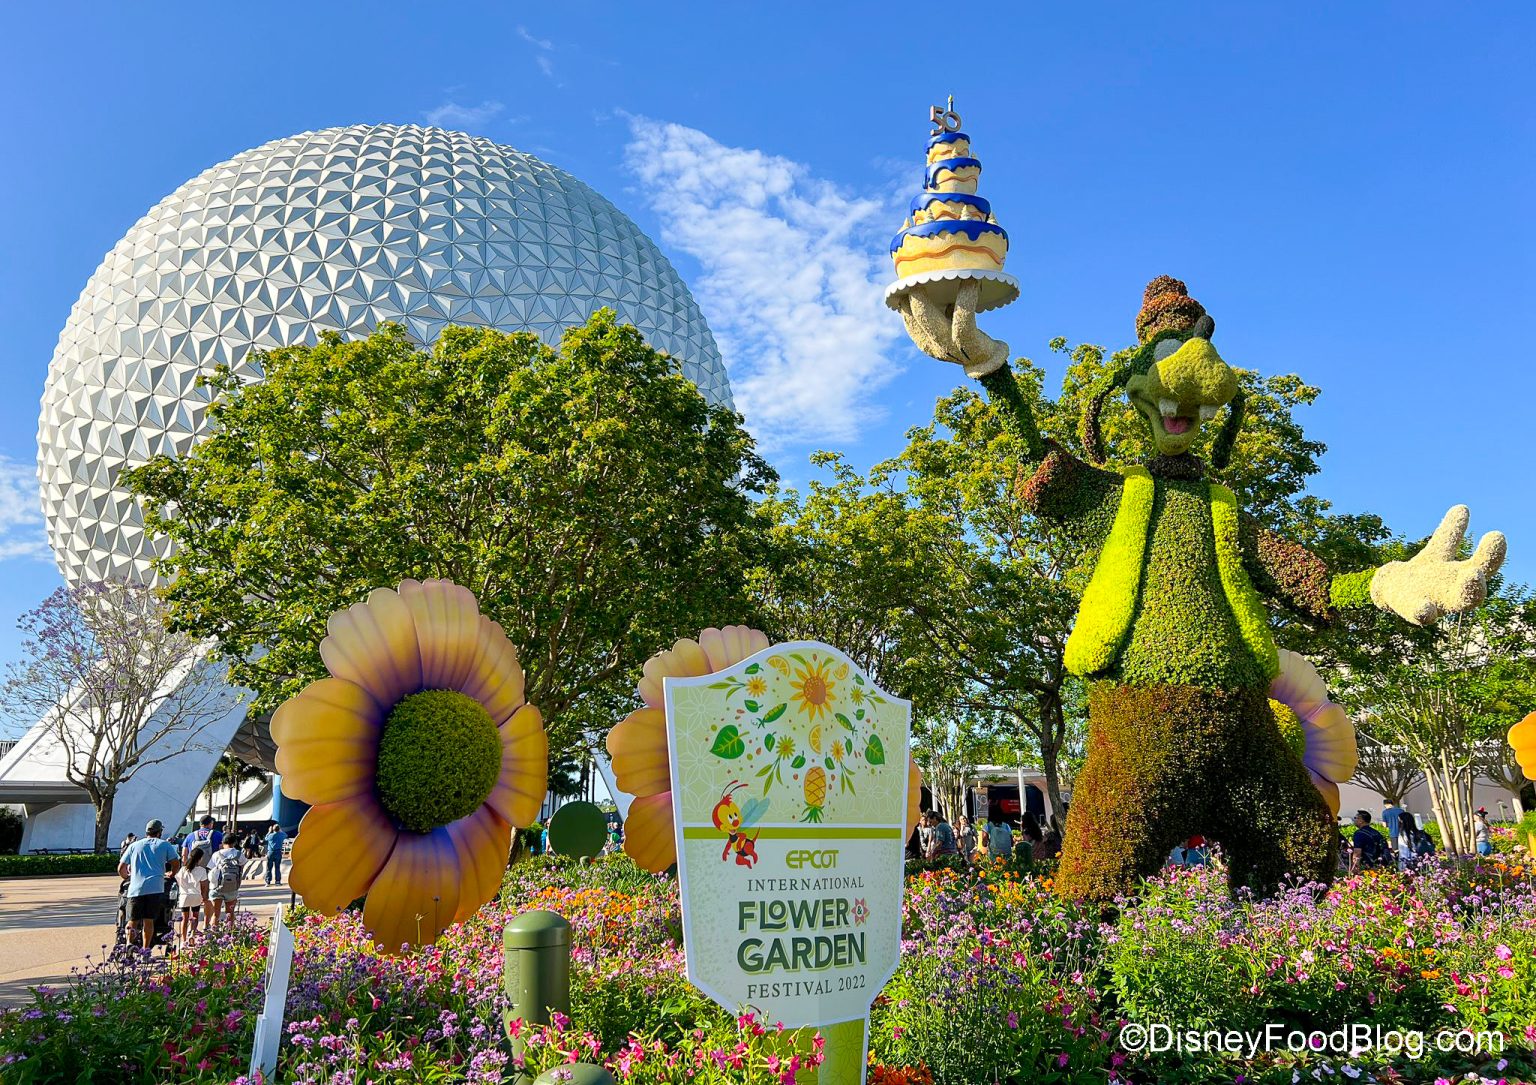 FULL LINEUP Announced for the 2023 EPCOT Flower and Garden Festival